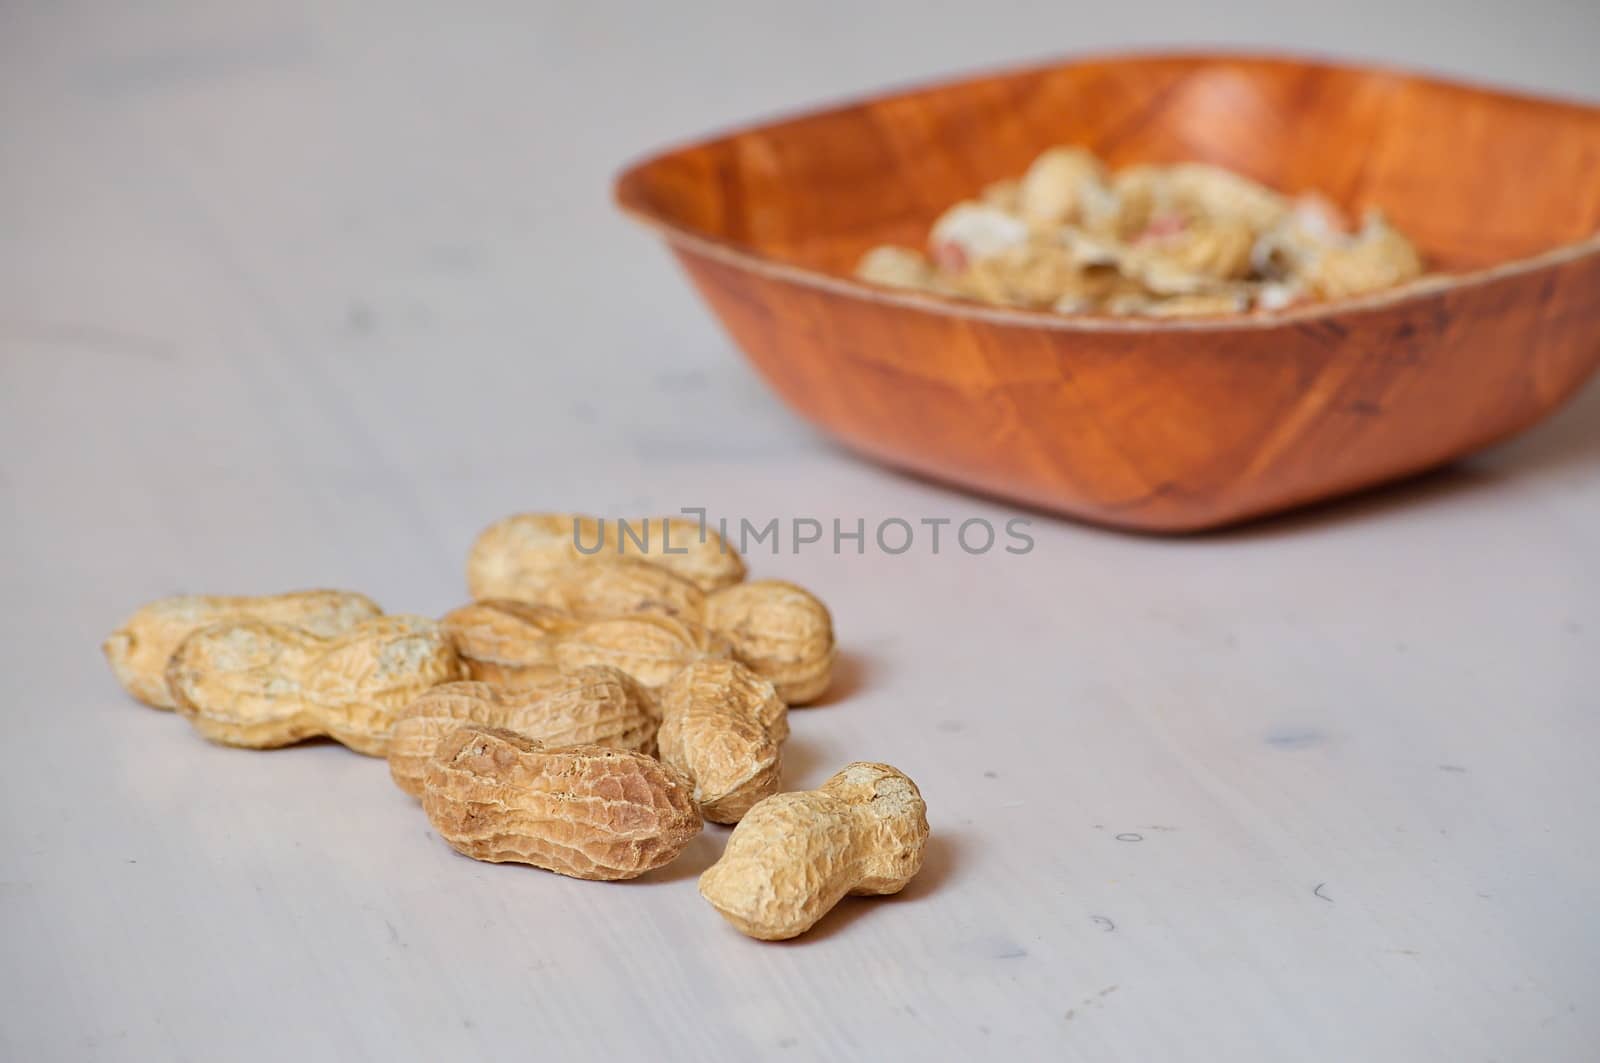 Peanuts in a brown bowl by anderm